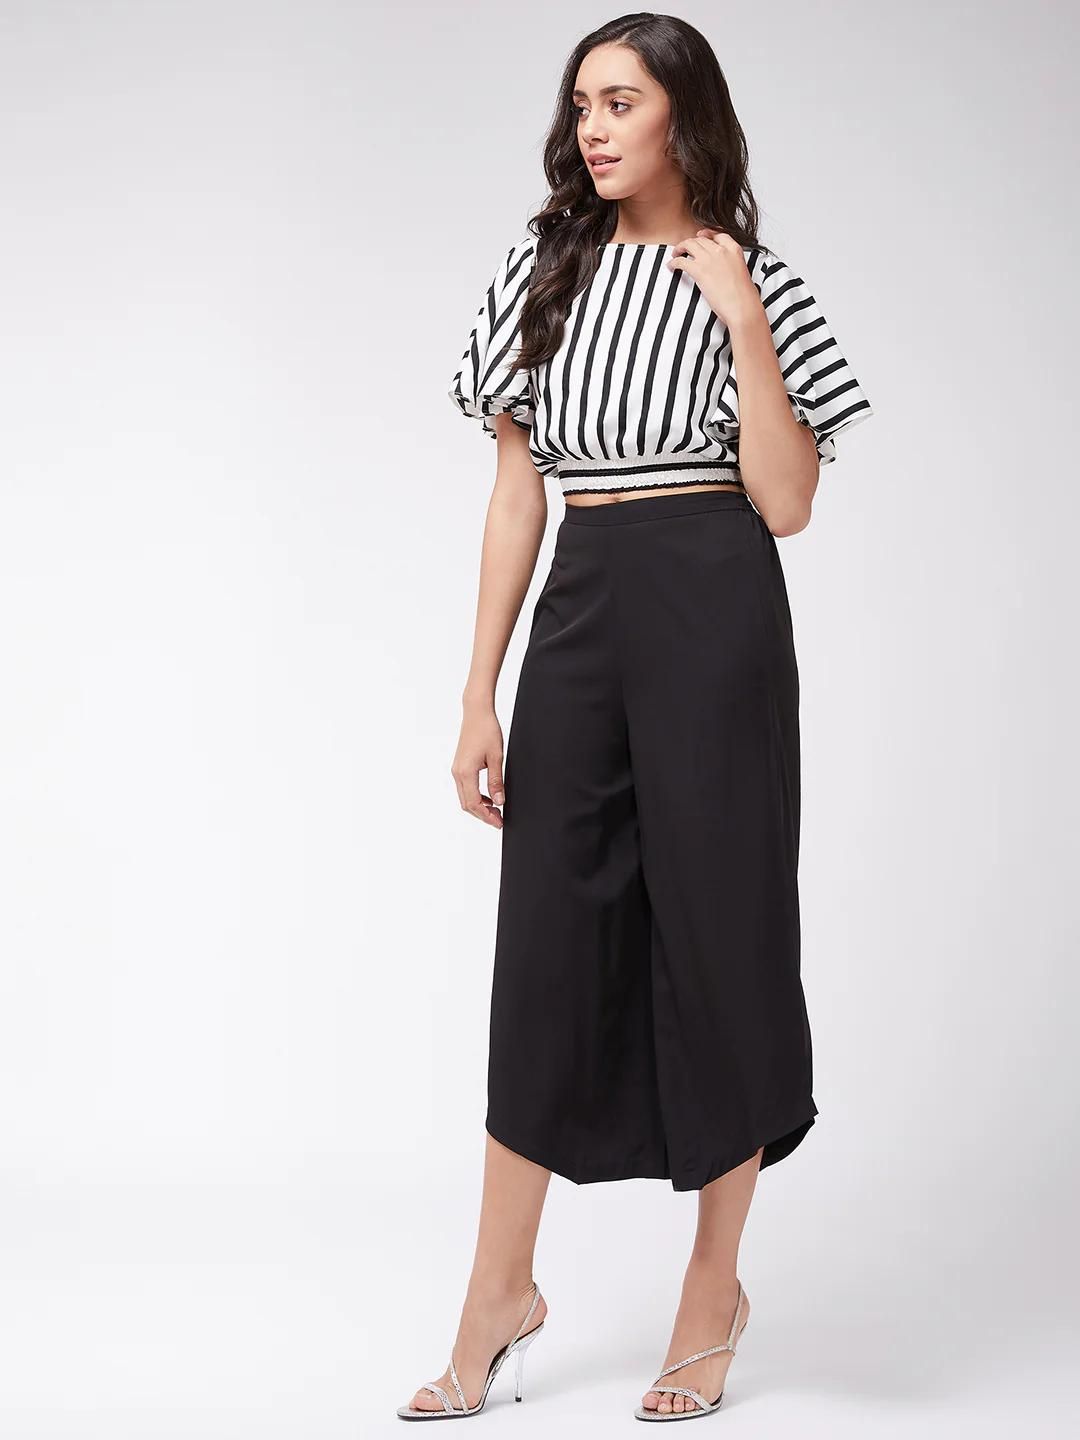 PANNKH Monocromatic Stripes Crop Top With Solid Pants